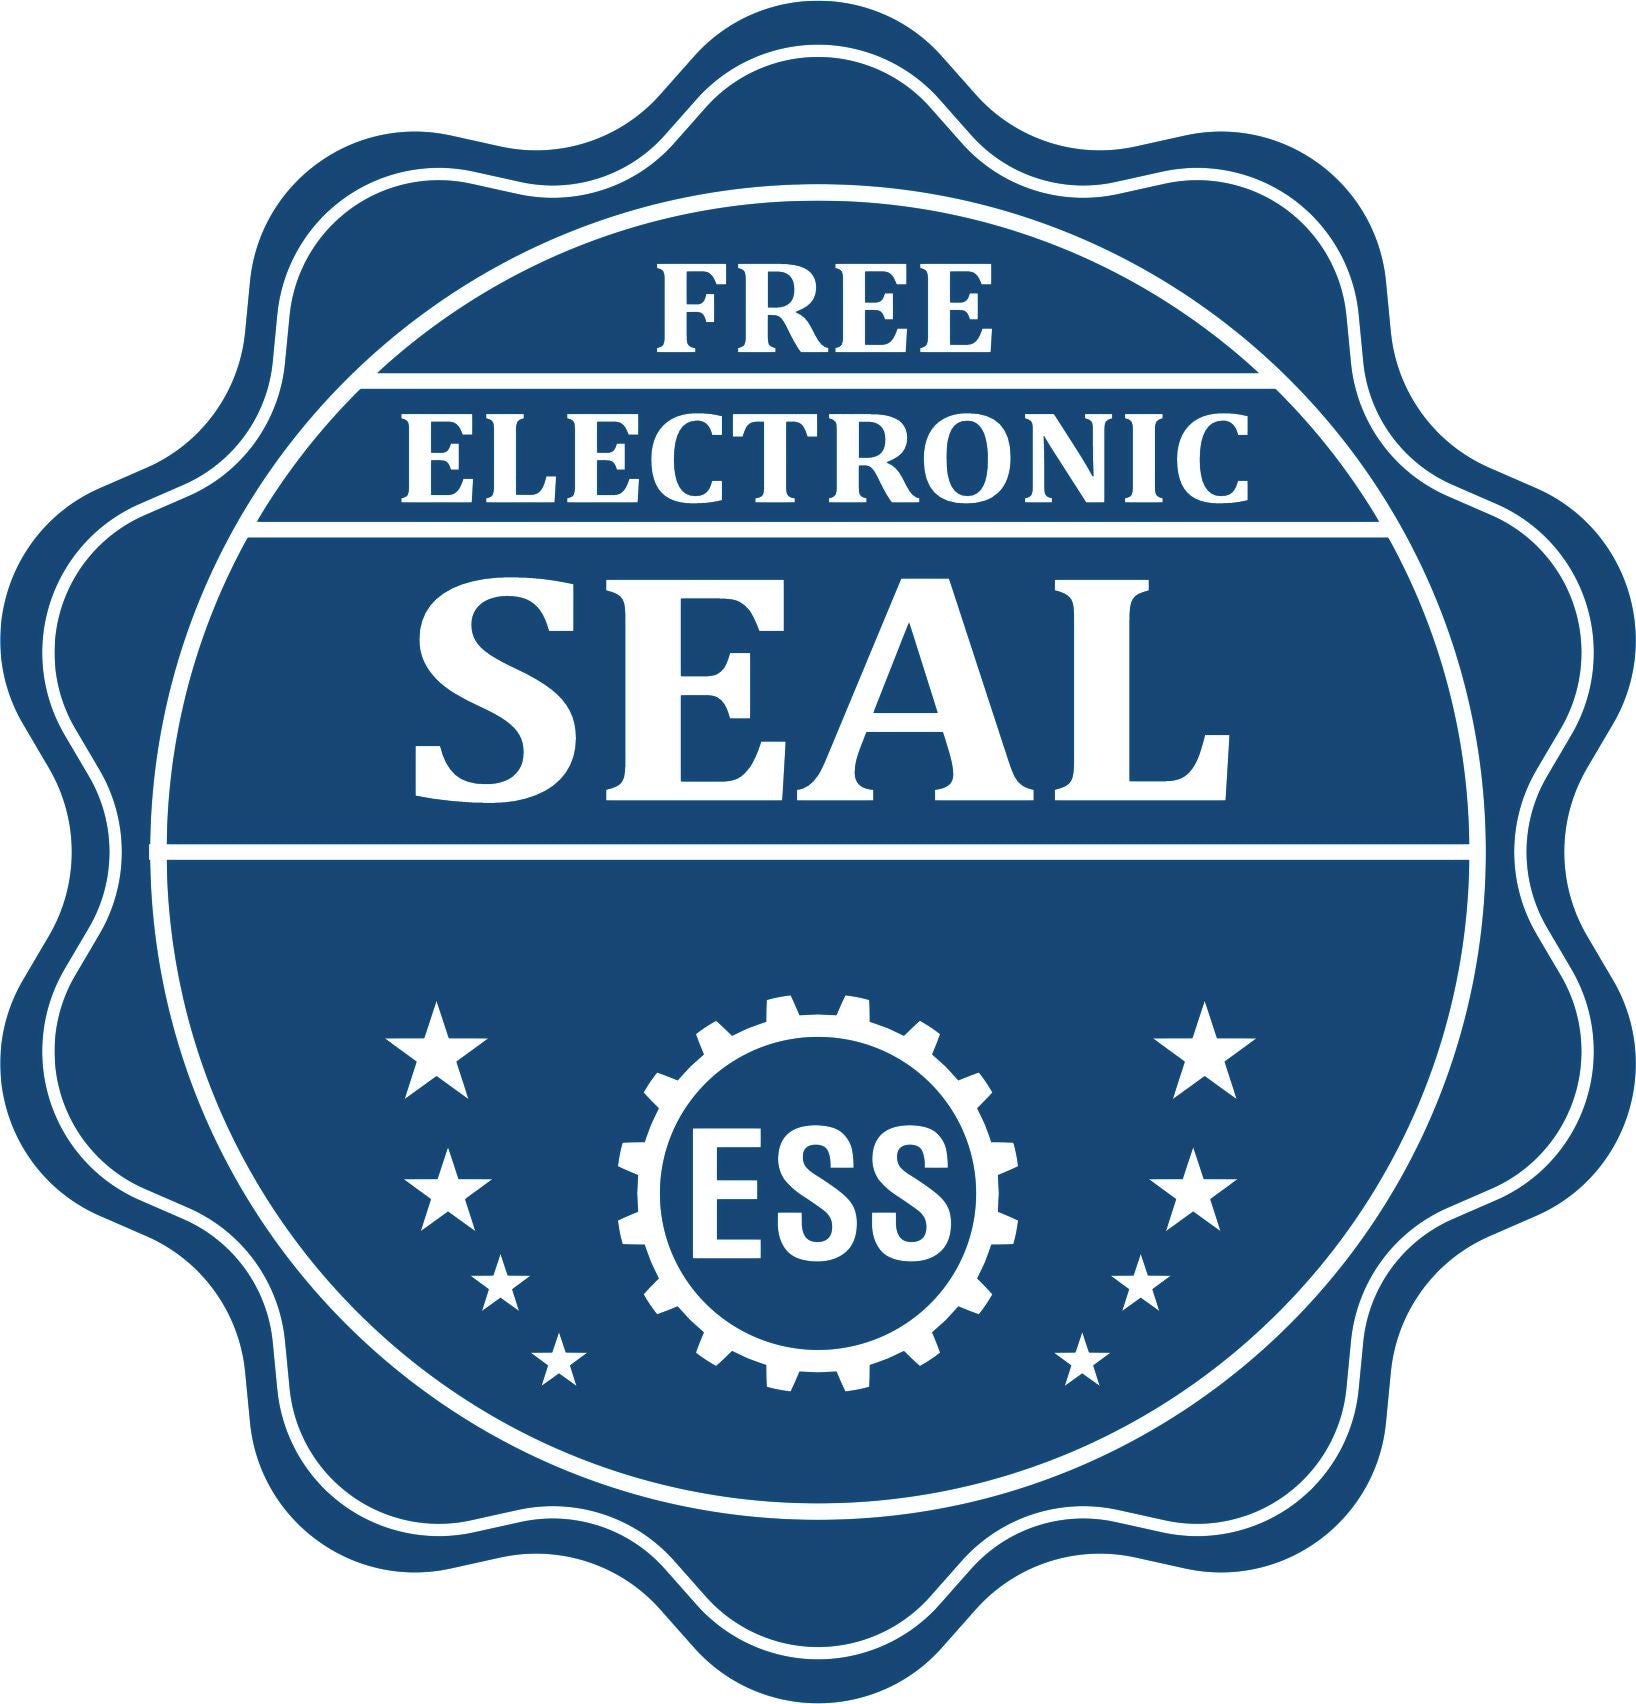 A badge showing a free electronic seal for the Kentucky Professional Engineer Seal Stamp with stars and the ESS gear on the emblem.